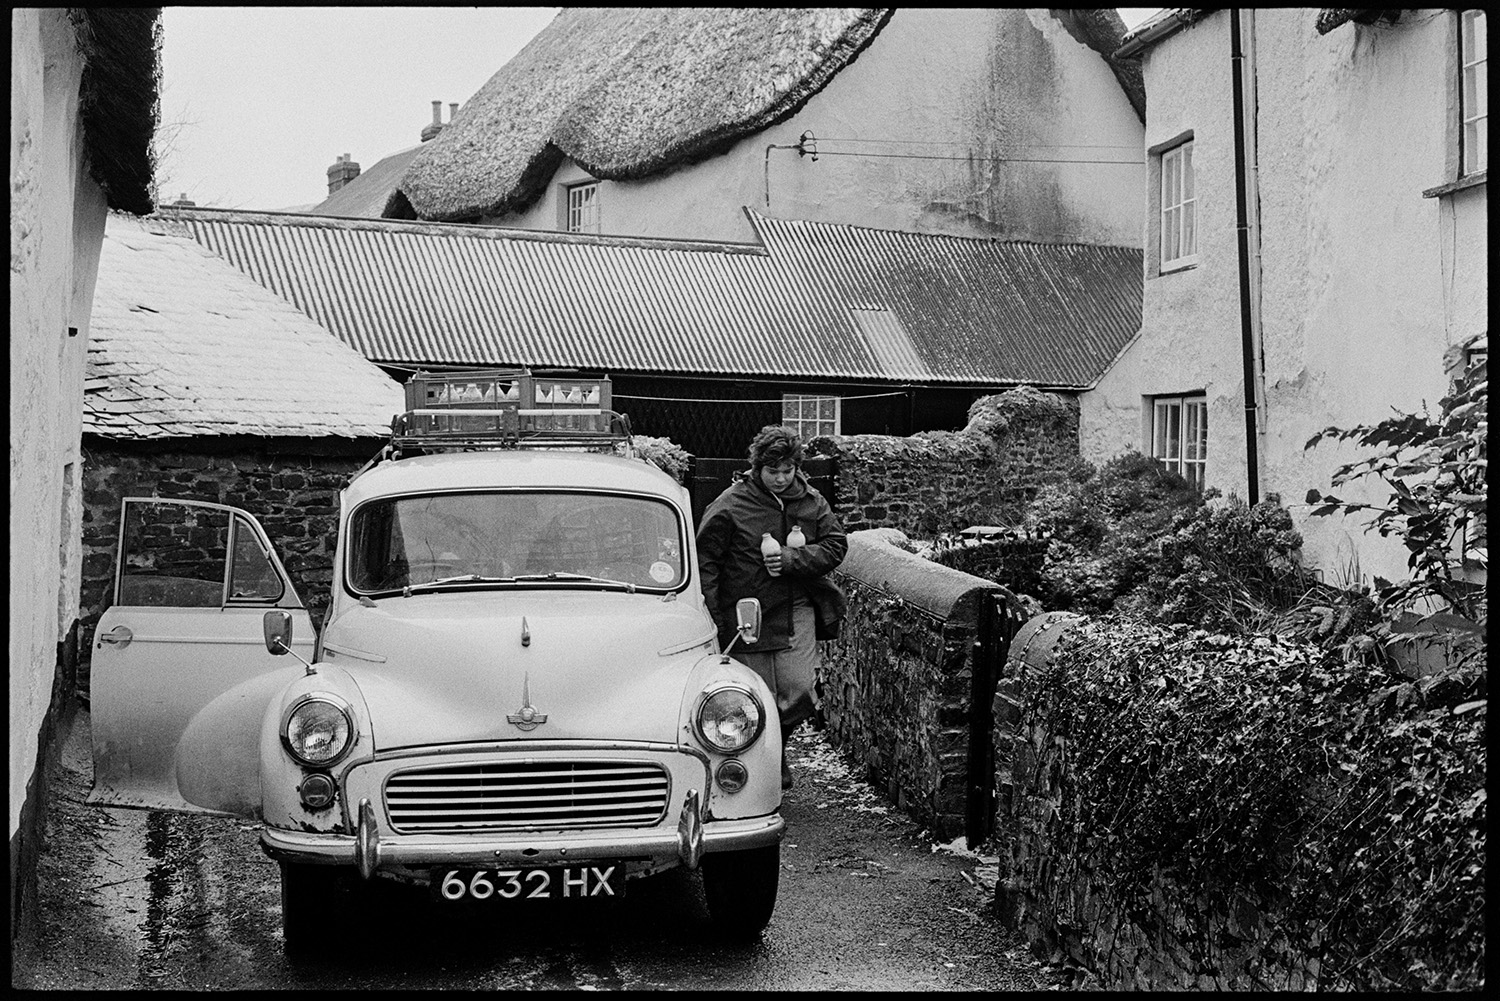 Woman delivering milk round village from Morris Minor car. 
[Diane Hiscock delivering milk around Dolton in her Morris Minor car. She is taking two milk bottles to a house and crates of milk are stacked on top of the car.]